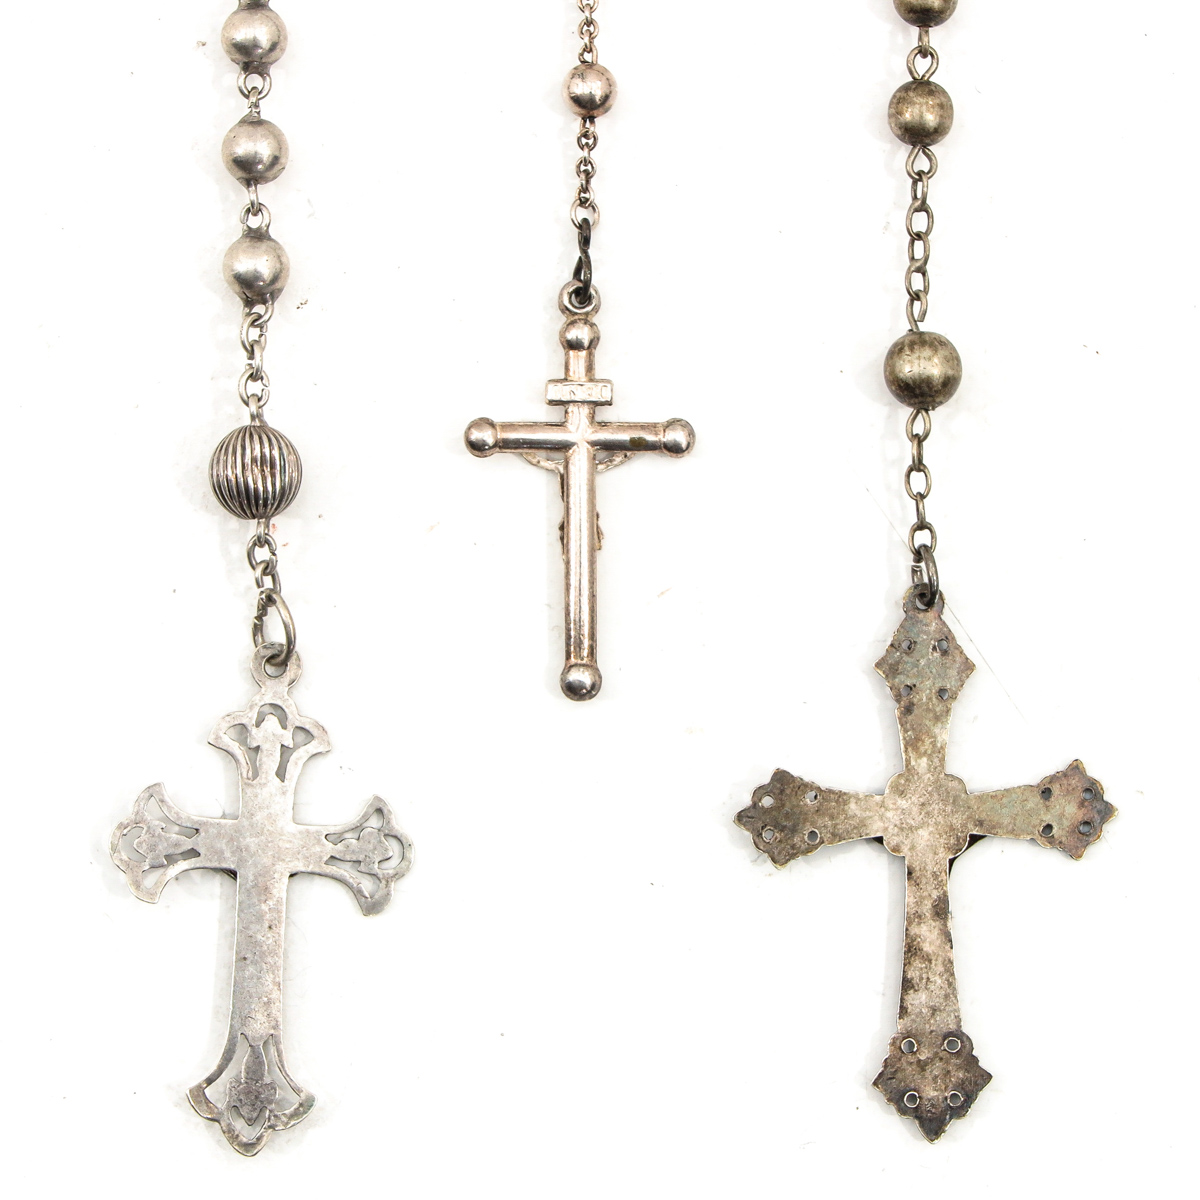 A Collection of 5 Silver Rosaries - Image 6 of 8